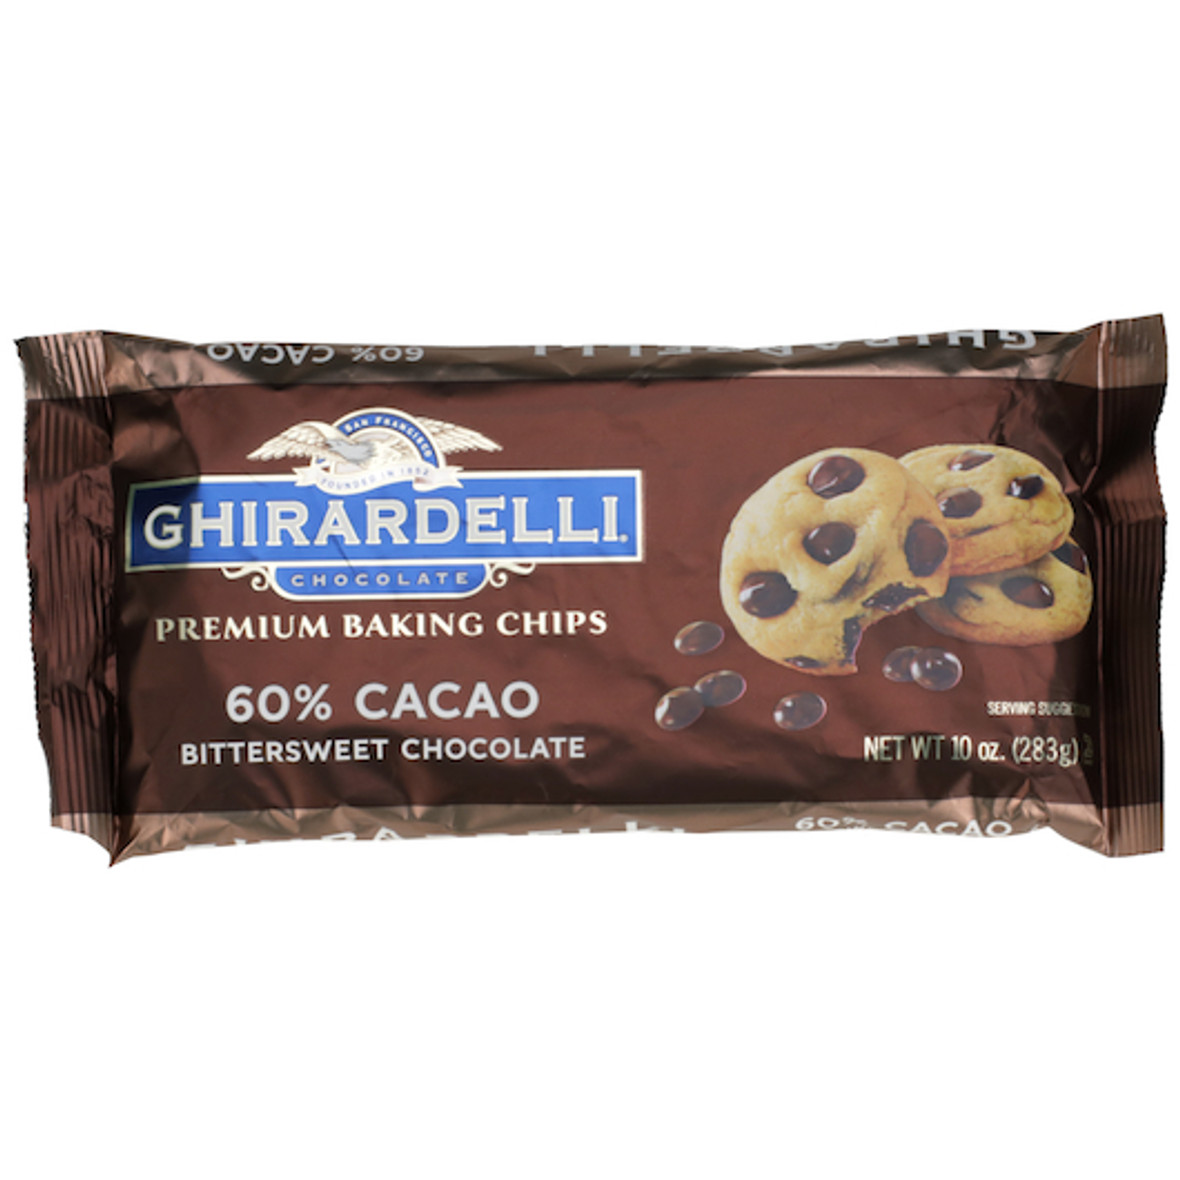 Ghirardelli 60% Cacao Premium Baking Chocolate Chips - 
Milk Chocolate And Caramel Flavor